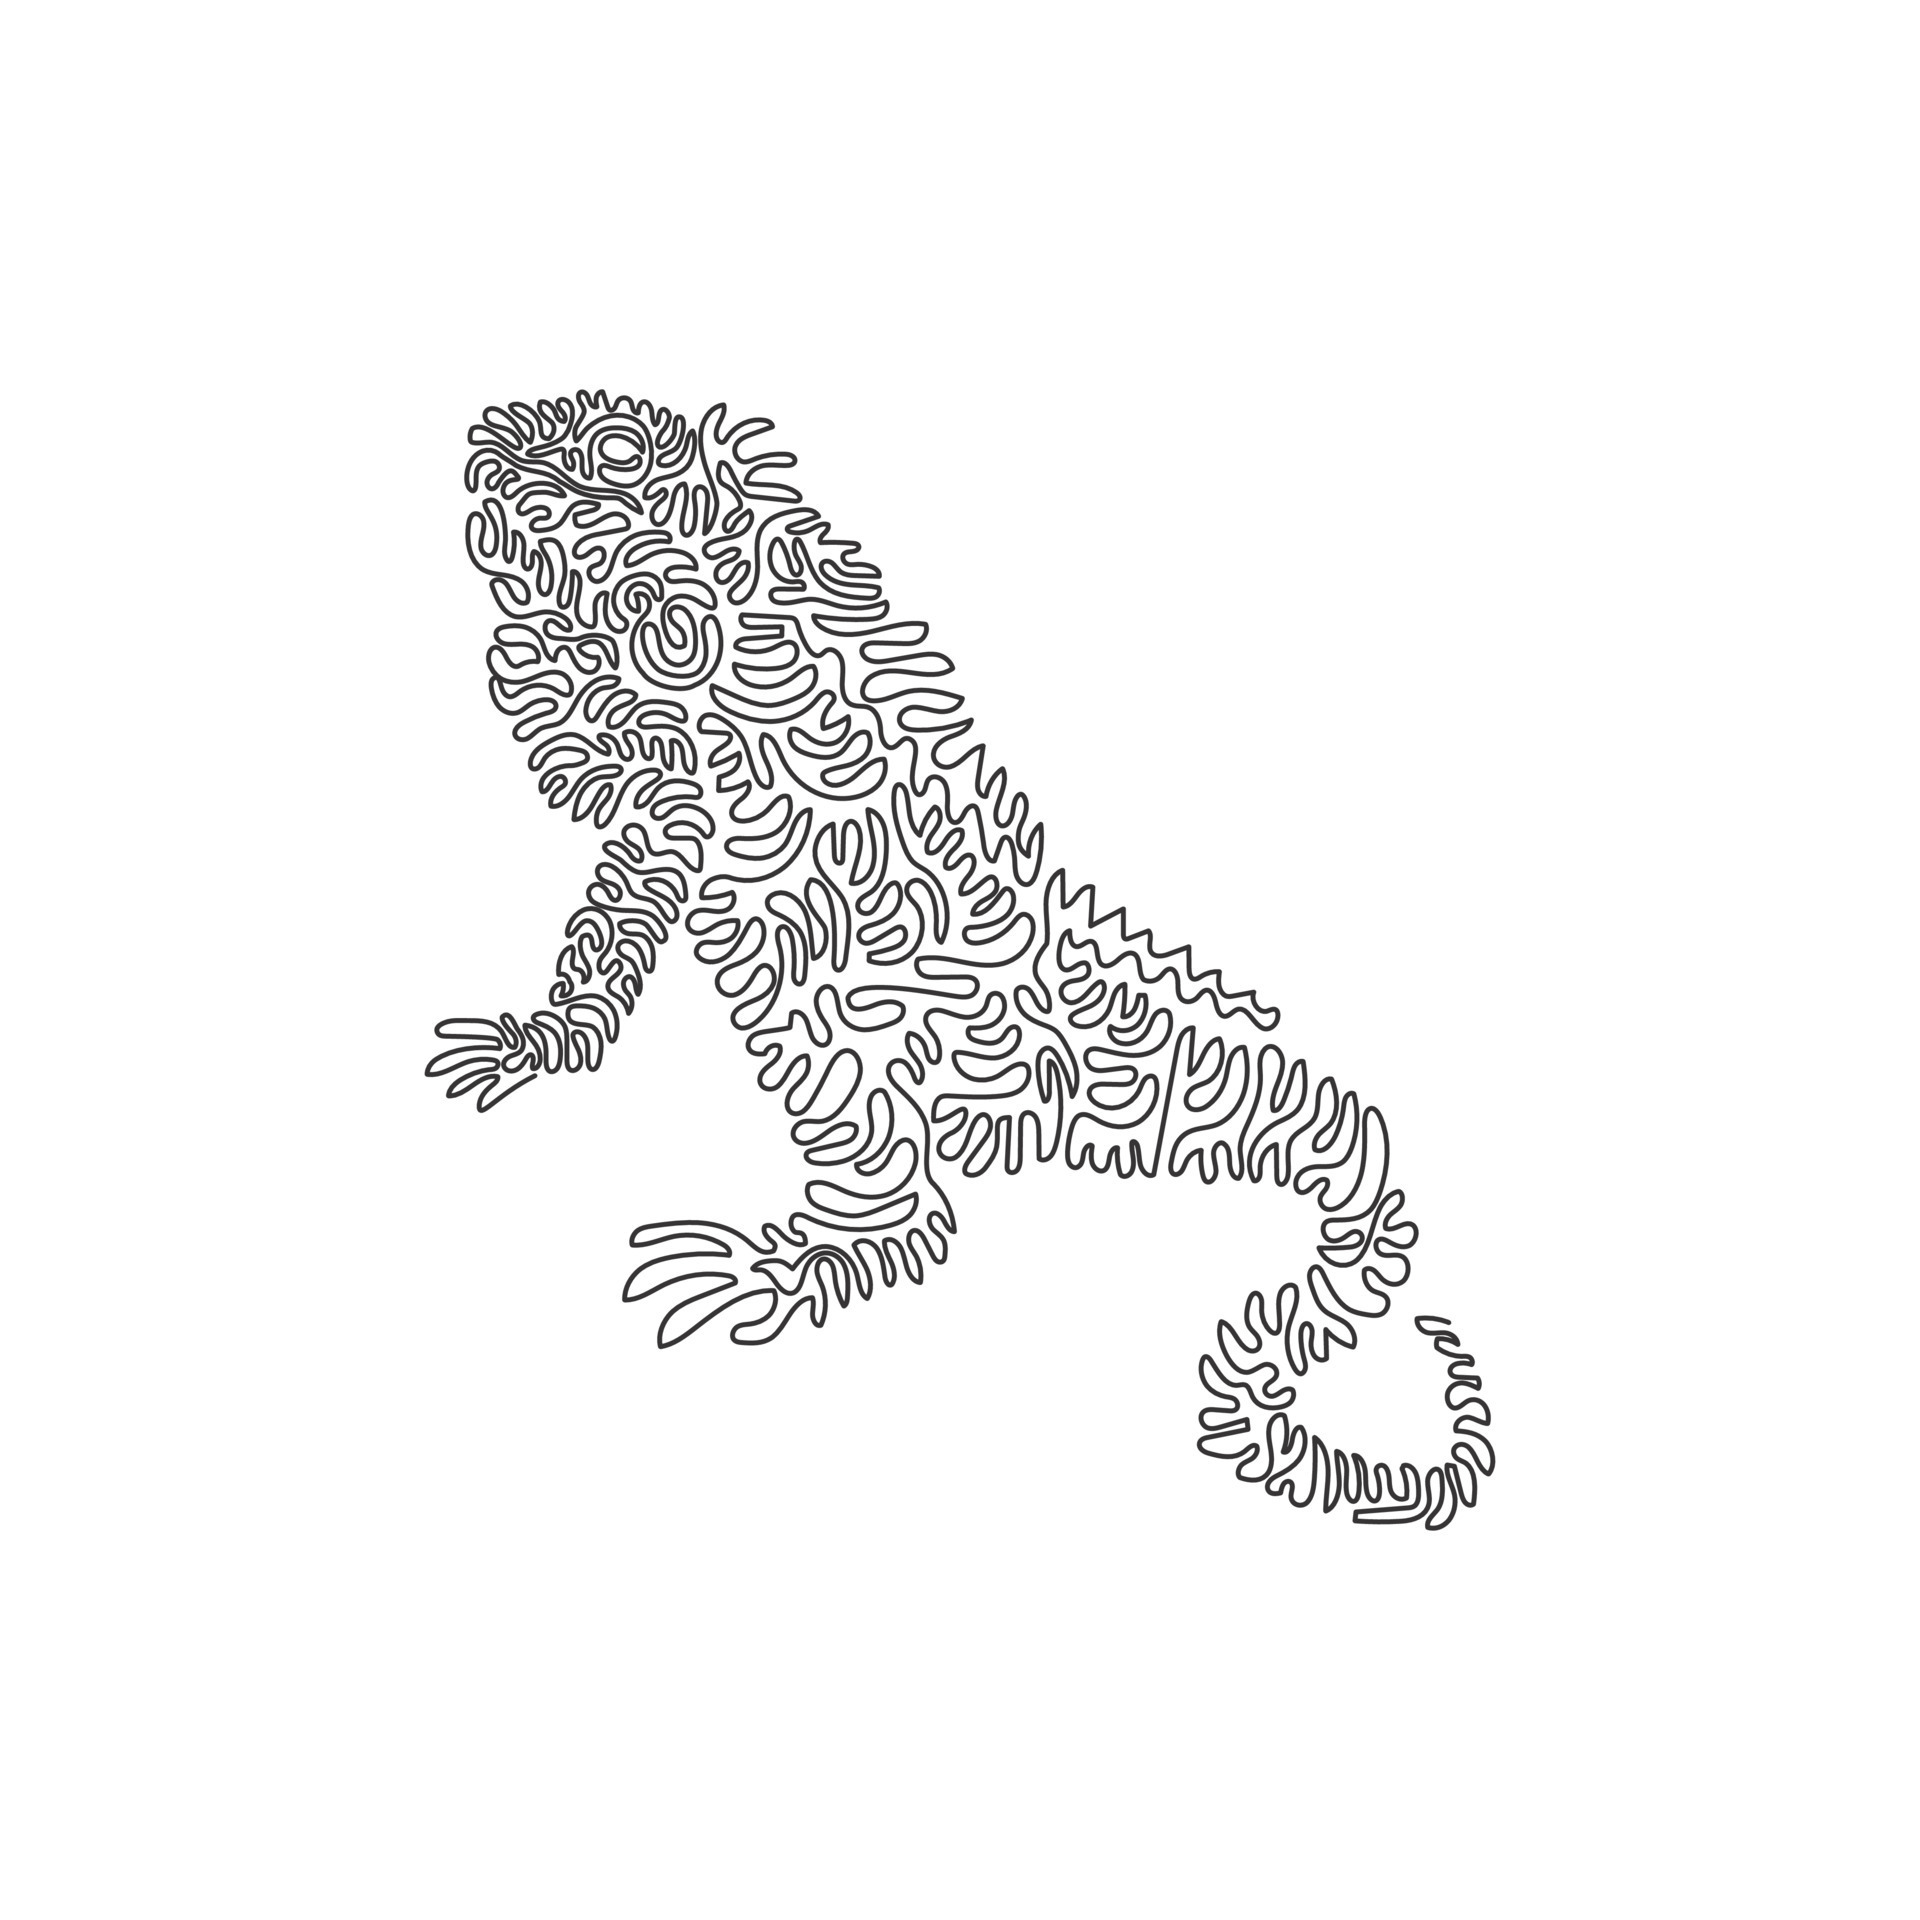 Continuous curve one line drawing of adorable iguana curve abstract art. Single  line editable stroke vector illustration of iguana's tail like a whip for  logo, wall decor, poster print decoration 17427343 Vector